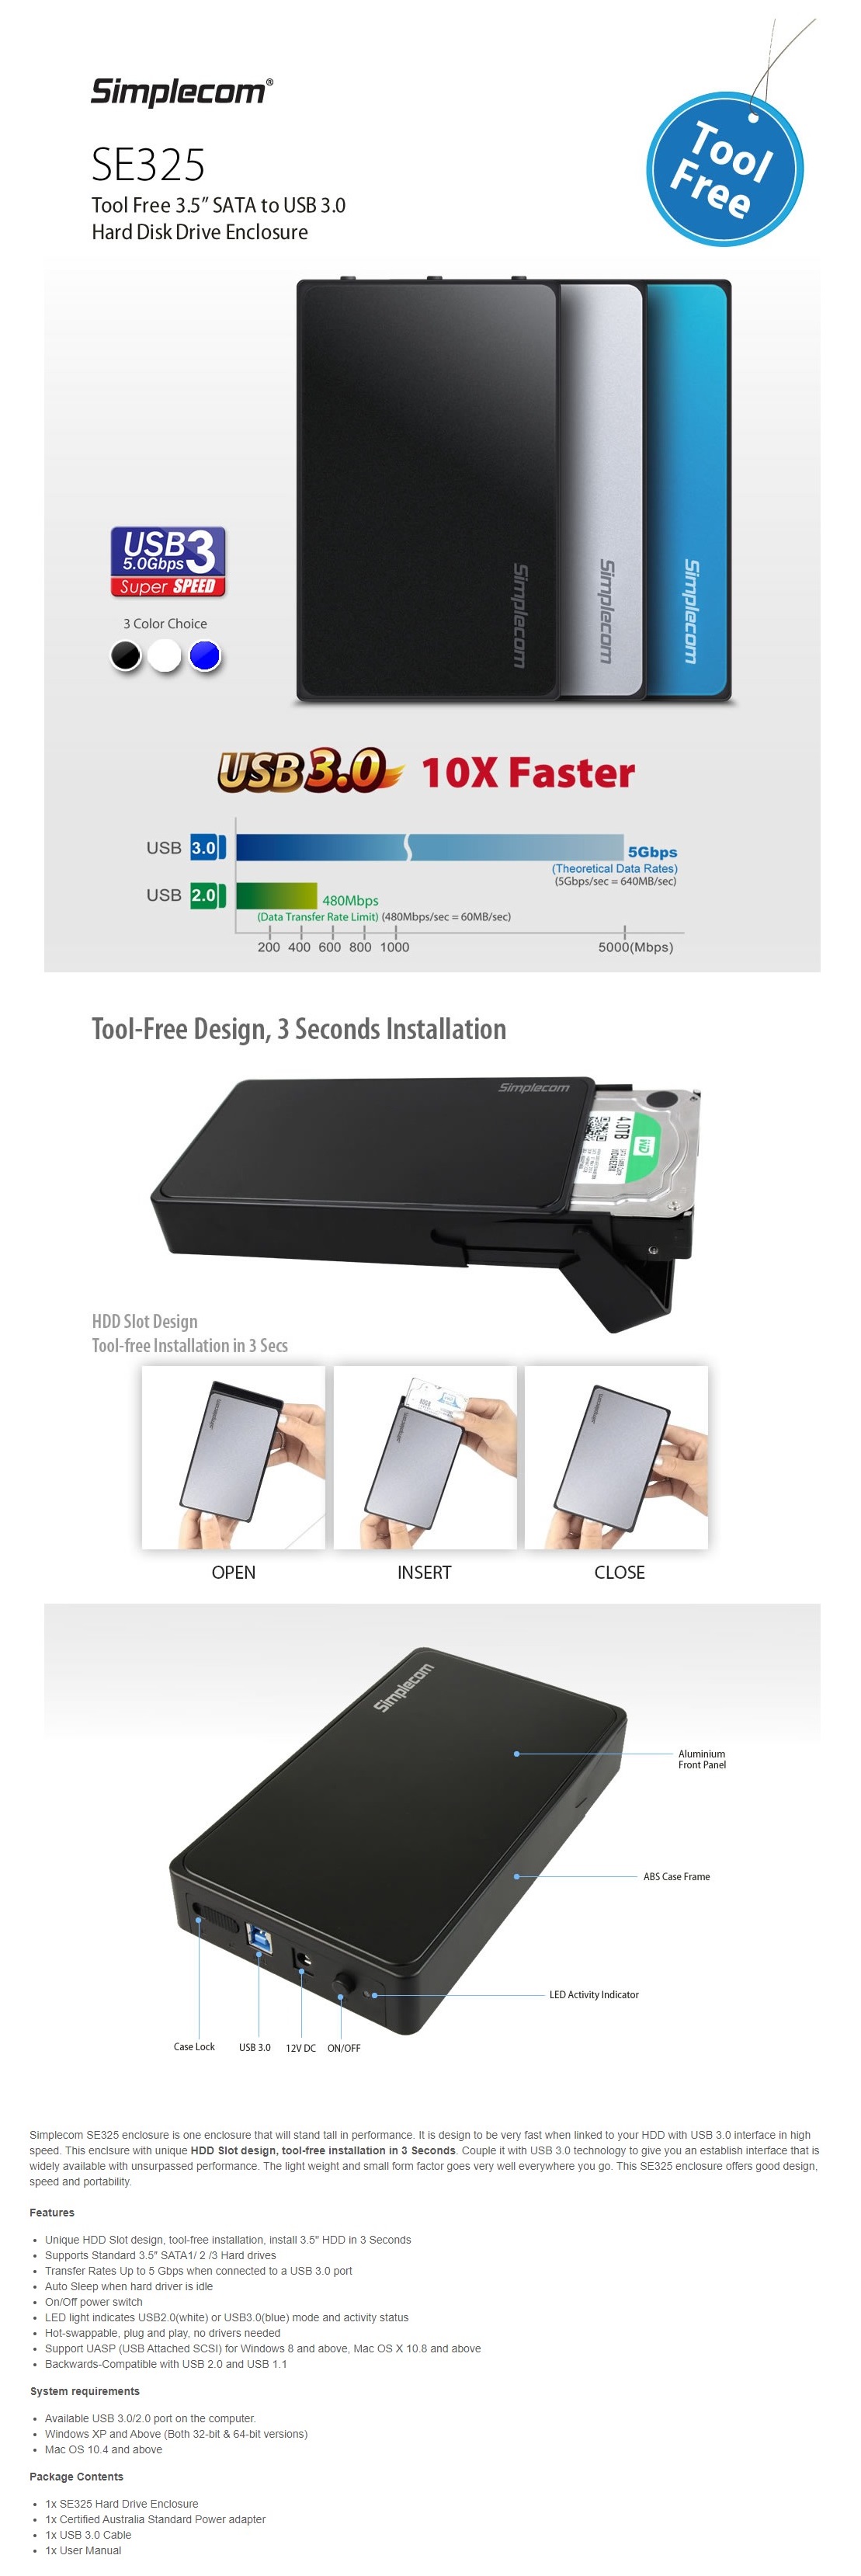 A large marketing image providing additional information about the product Simplecom SE325 3.5" SATA HDD to USB 3.0 Hard Drive Enclosure - Black - Additional alt info not provided